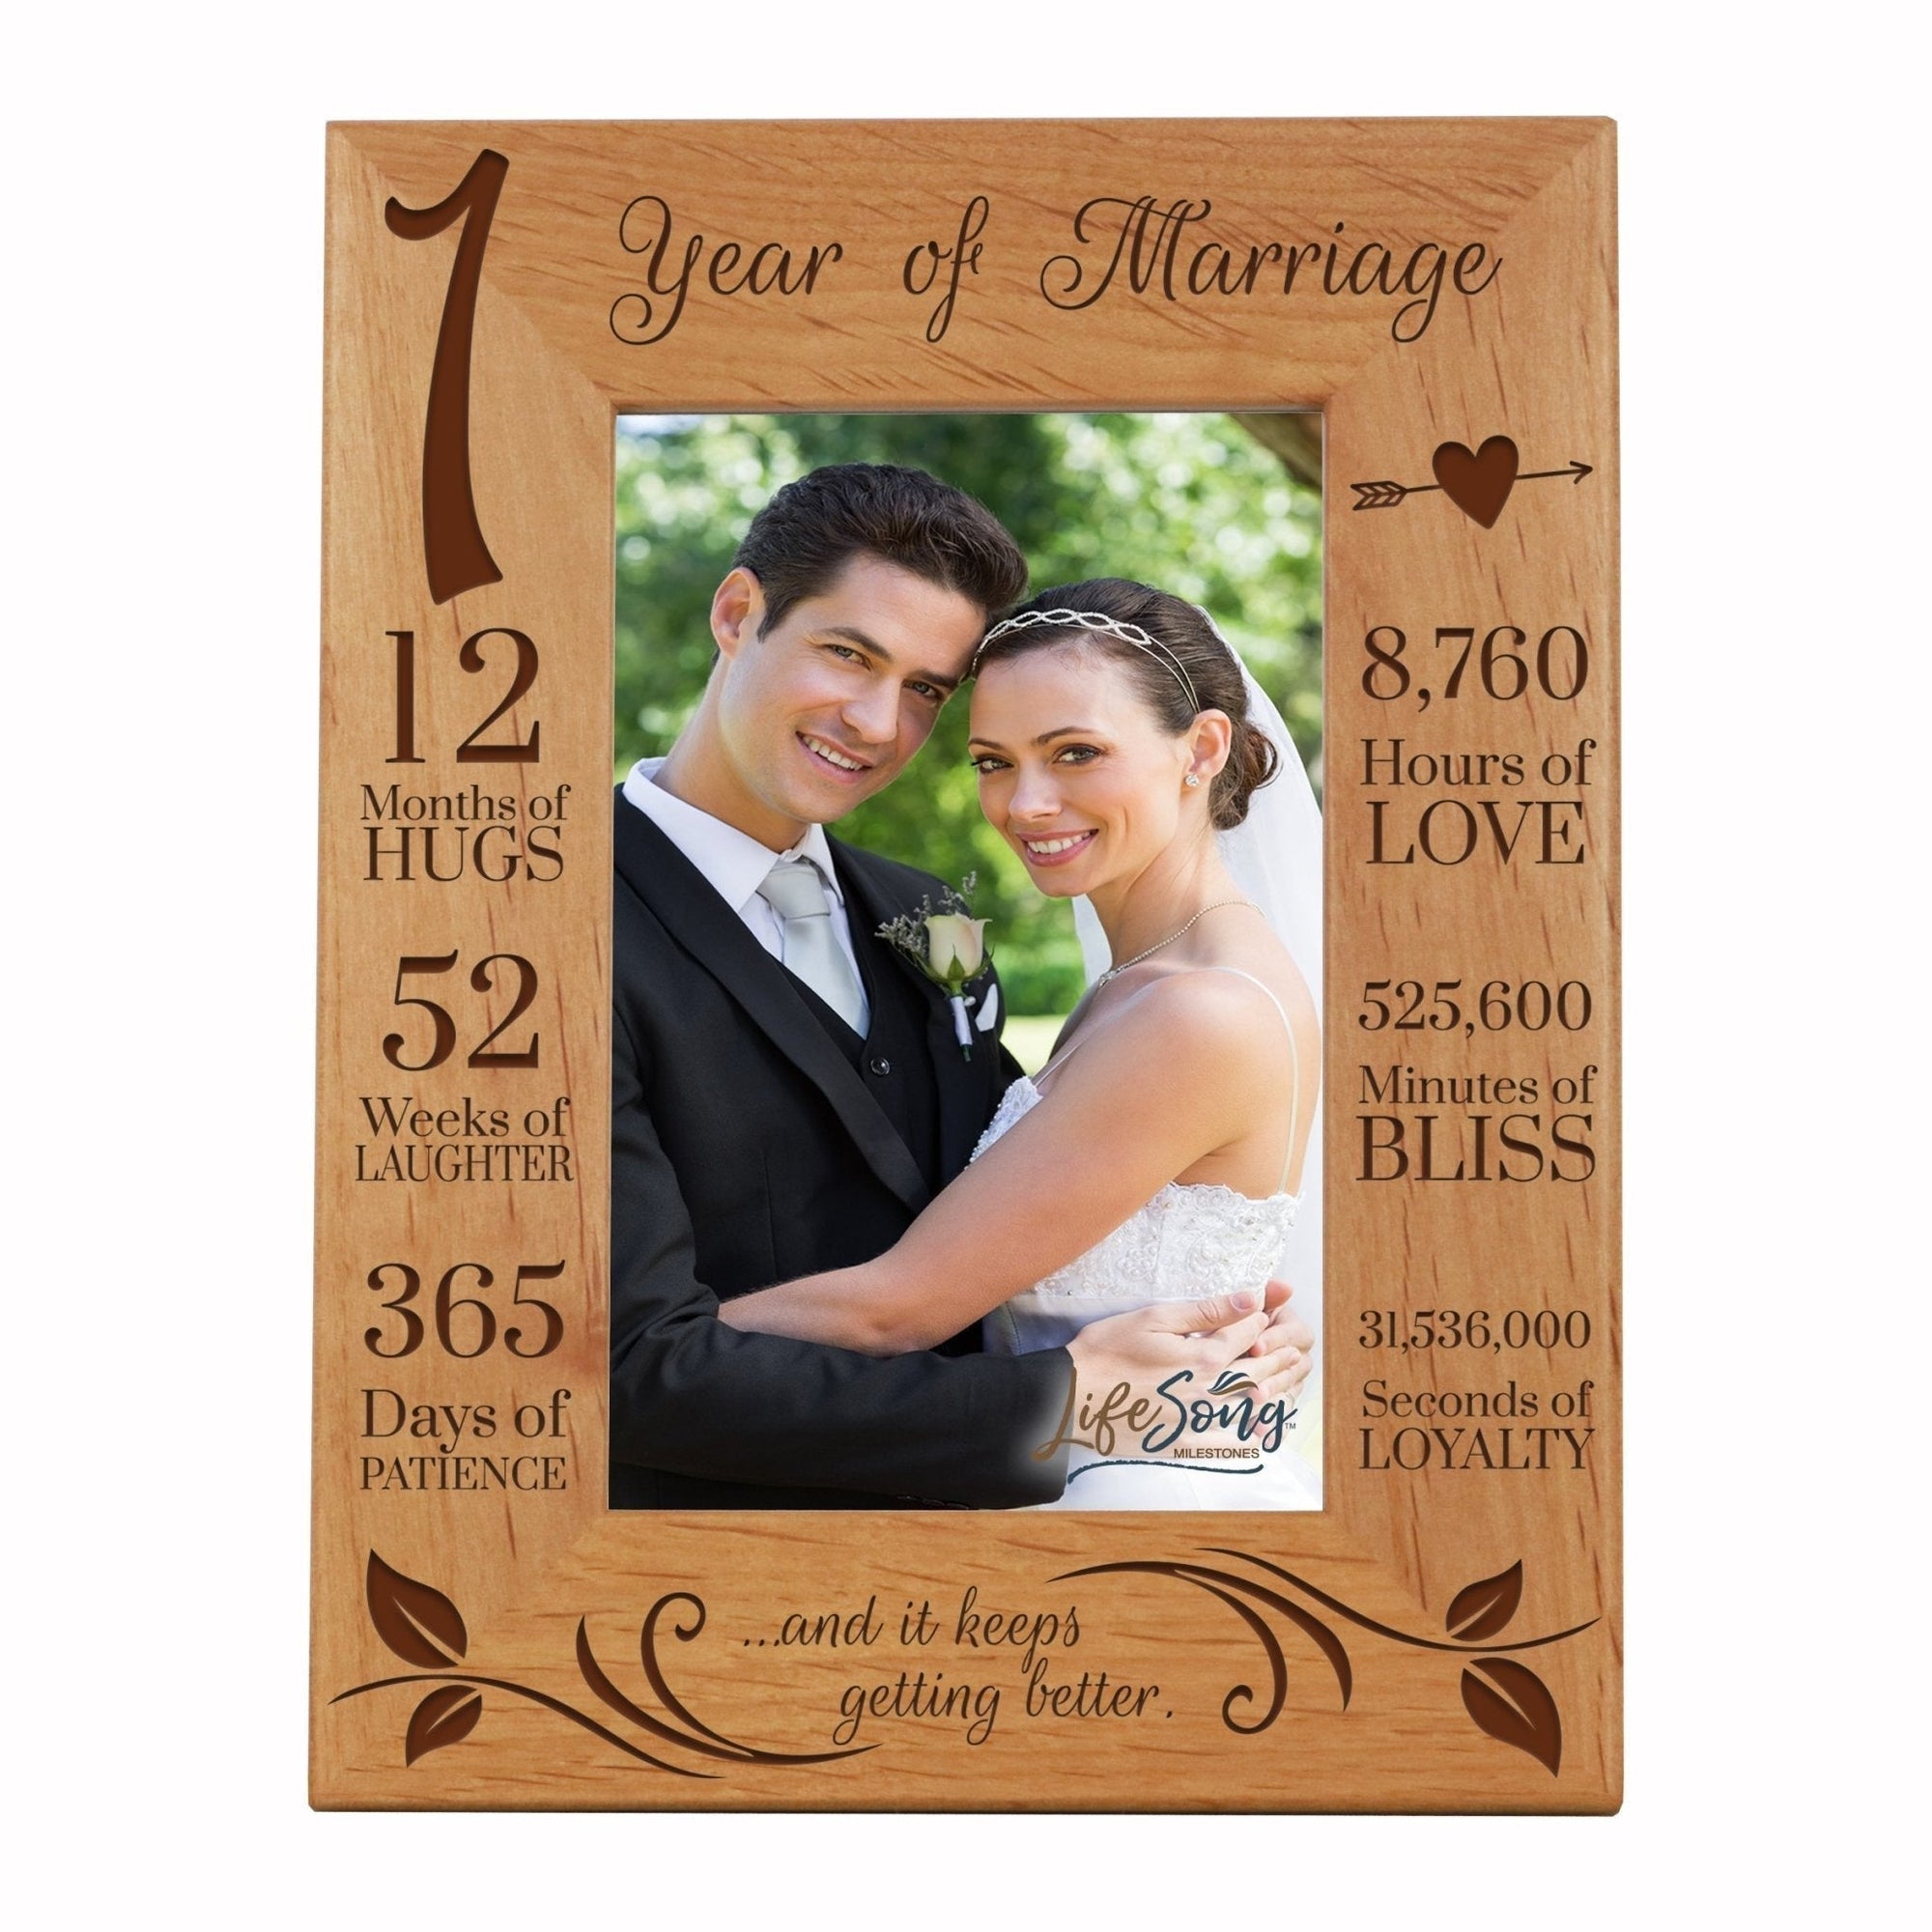 Engraved 1st Anniversary Picture Frame Gift for Couples - Keeps Getting Better - LifeSong Milestones